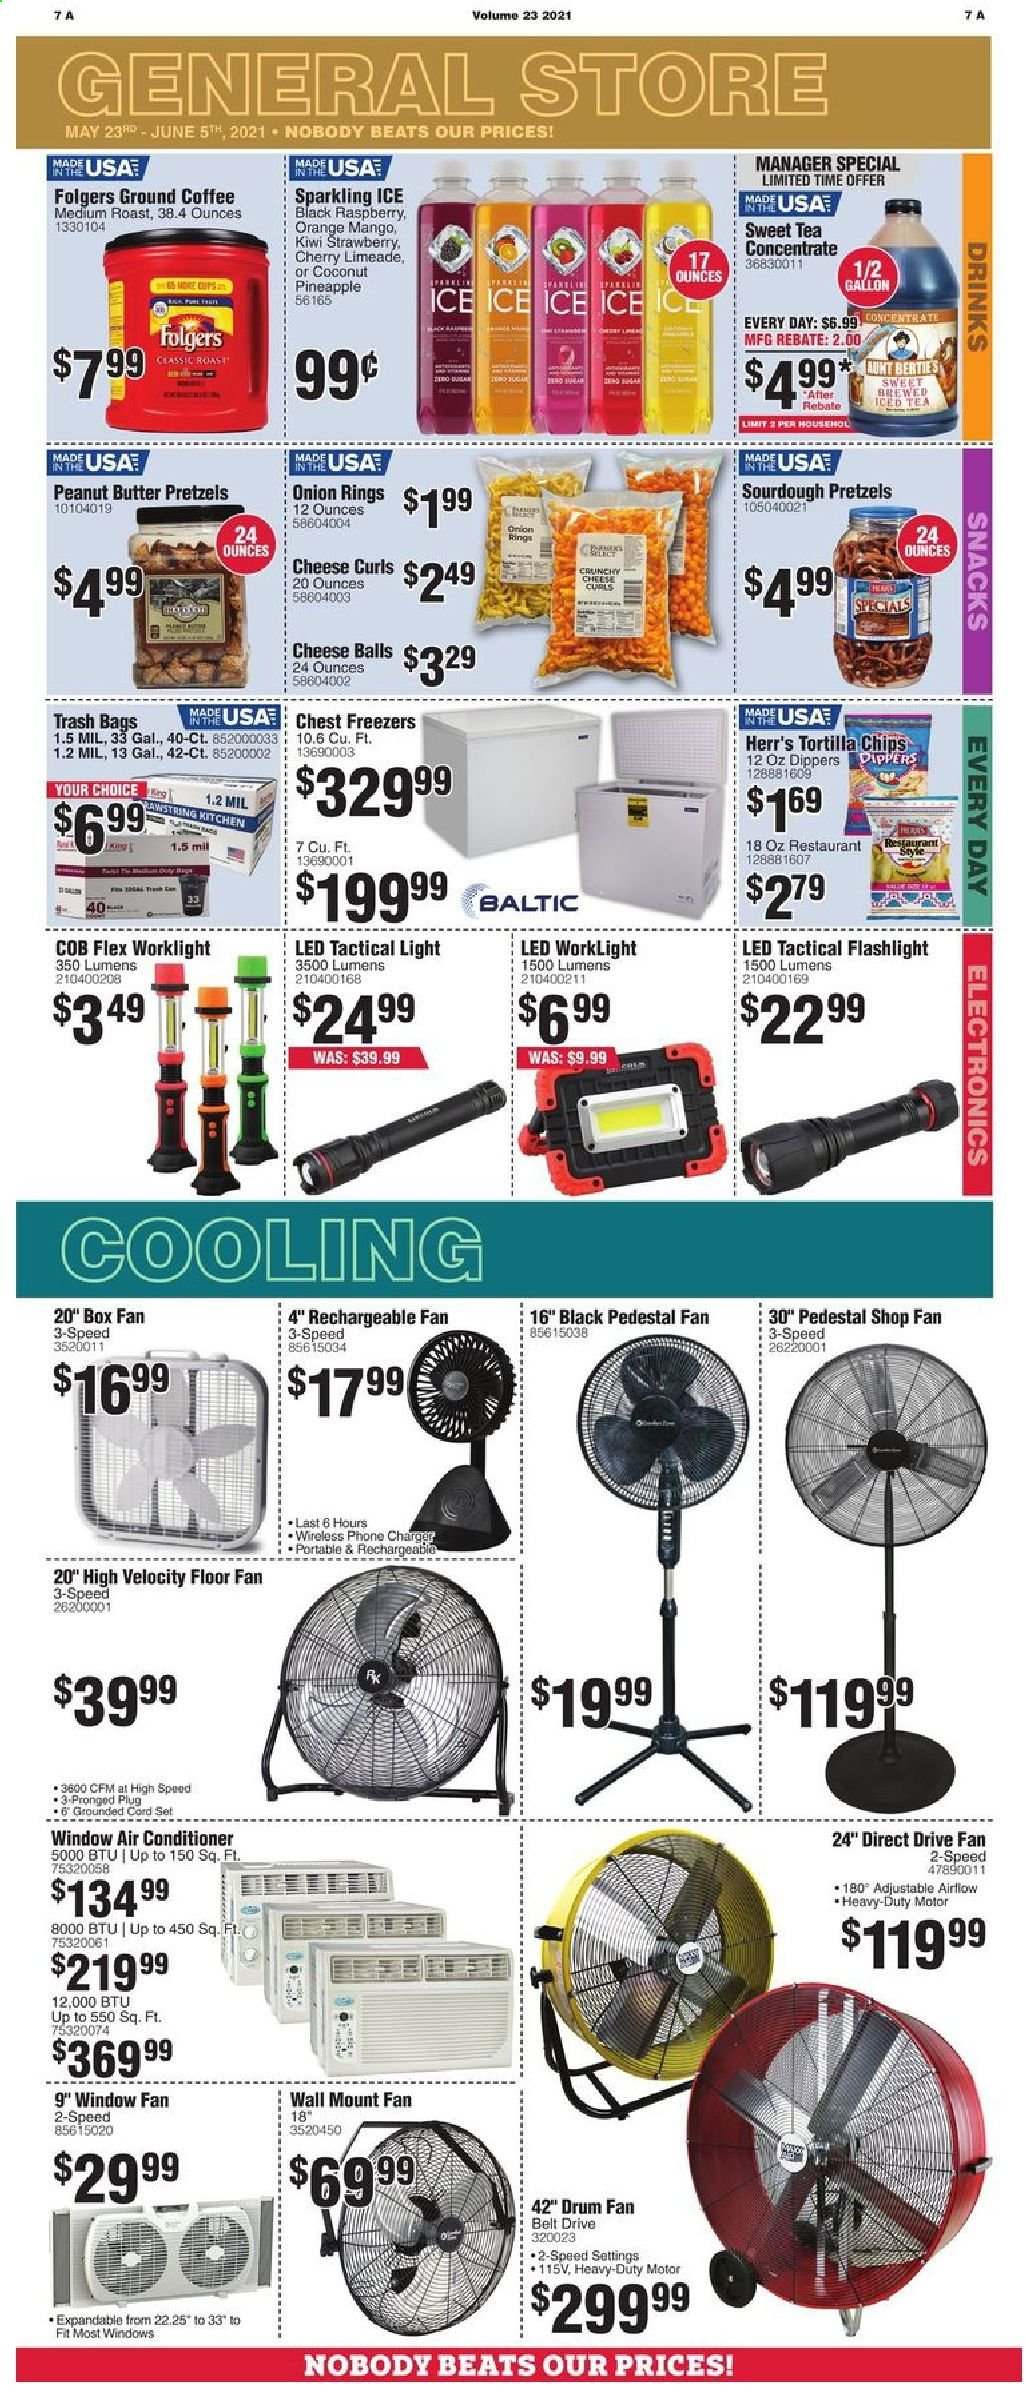 thumbnail - Rural King Flyer - 05/23/2021 - 06/05/2021 - Sales products - onion rings, pretzels, snack, tortilla chips, chips, mango, peanut butter, ice tea, coffee, Folgers, ground coffee, trash bags, chest freezer, air conditioner, stand fan, window fan, rechargeable fan, wall fan, belt, flashlight, cord set. Page 10.